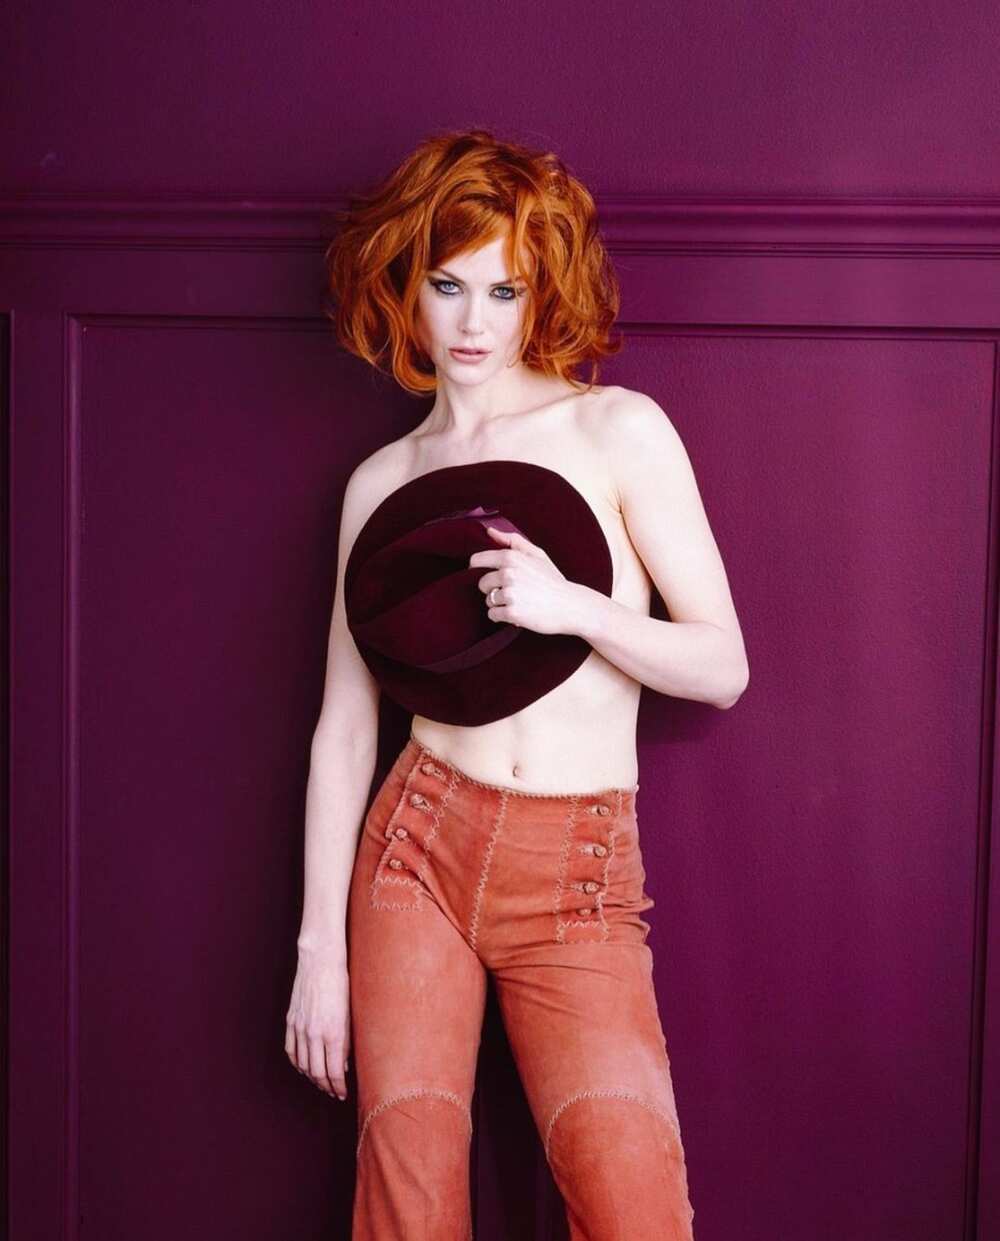 bryan carder recommends pics of hot red heads pic